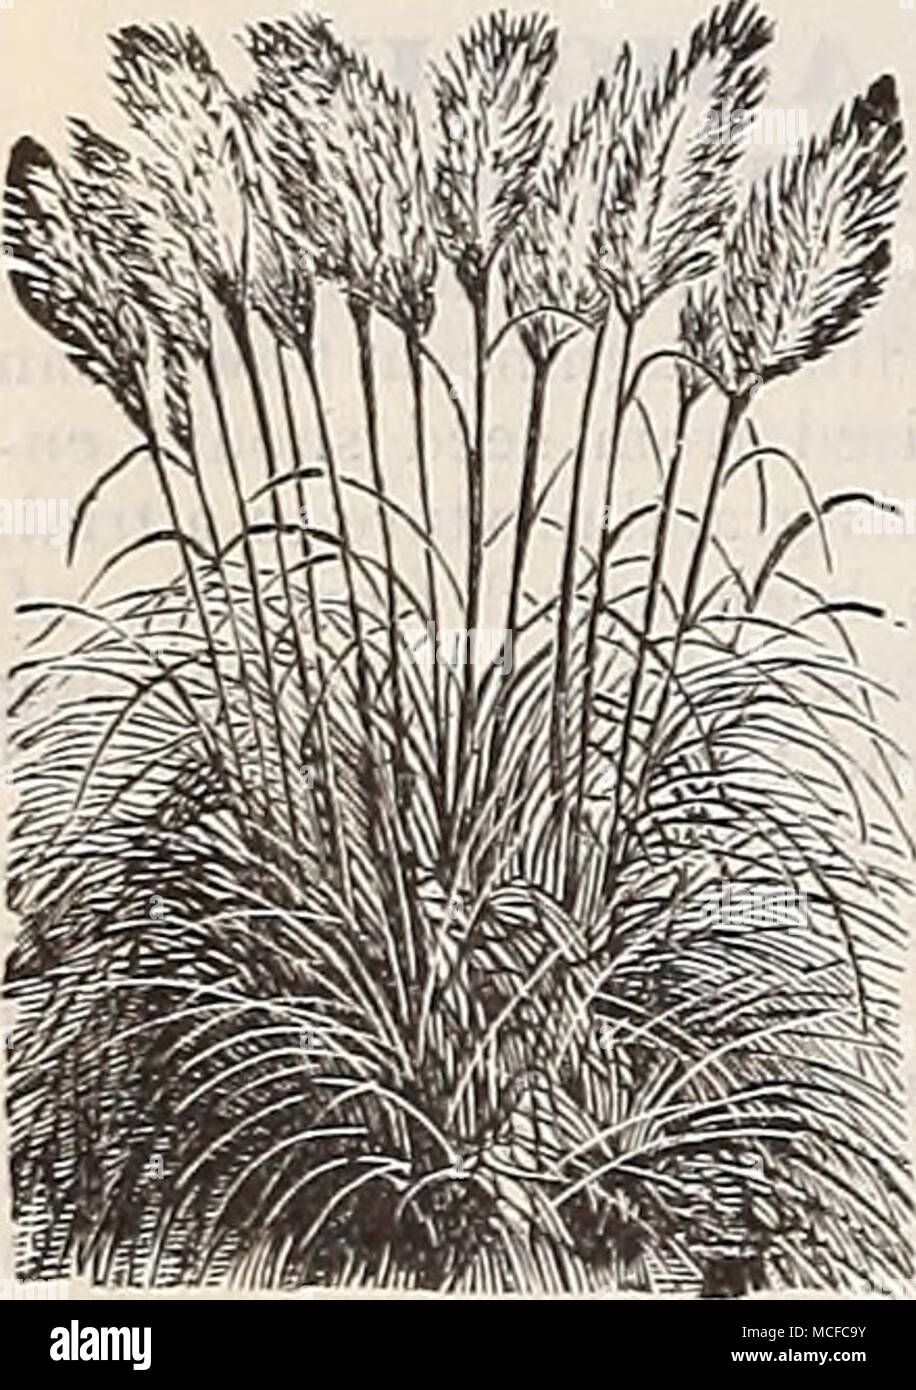 . 5802 Eulalia Jap. Varieg'ata. Striped white and green . 5988 Lag-urUS OvatuS [H^ires Tail Grass). Beauti- ful small white heads or spikes of bloom, excellent for bouquets ; annual; 1 foot &amp; 6263 Peunisetum Ruppeliammi. Beautiful and graceful spikes of purple ; whether for border decora- tion or for bouquets this is one of the. best; 2 J feet. 10 6556 Setaria Mag'ua {Brislty Fox-tail Grass). A handsome grass, growing 10 to 12 feet high, bearing dense spiked panicles 2 to 3 feet long 5 6586 Stipa Peunata {Feather Grass). Hardy perennial, beau- tiful, delicate white, feathery bloom ; flower Stock Photo